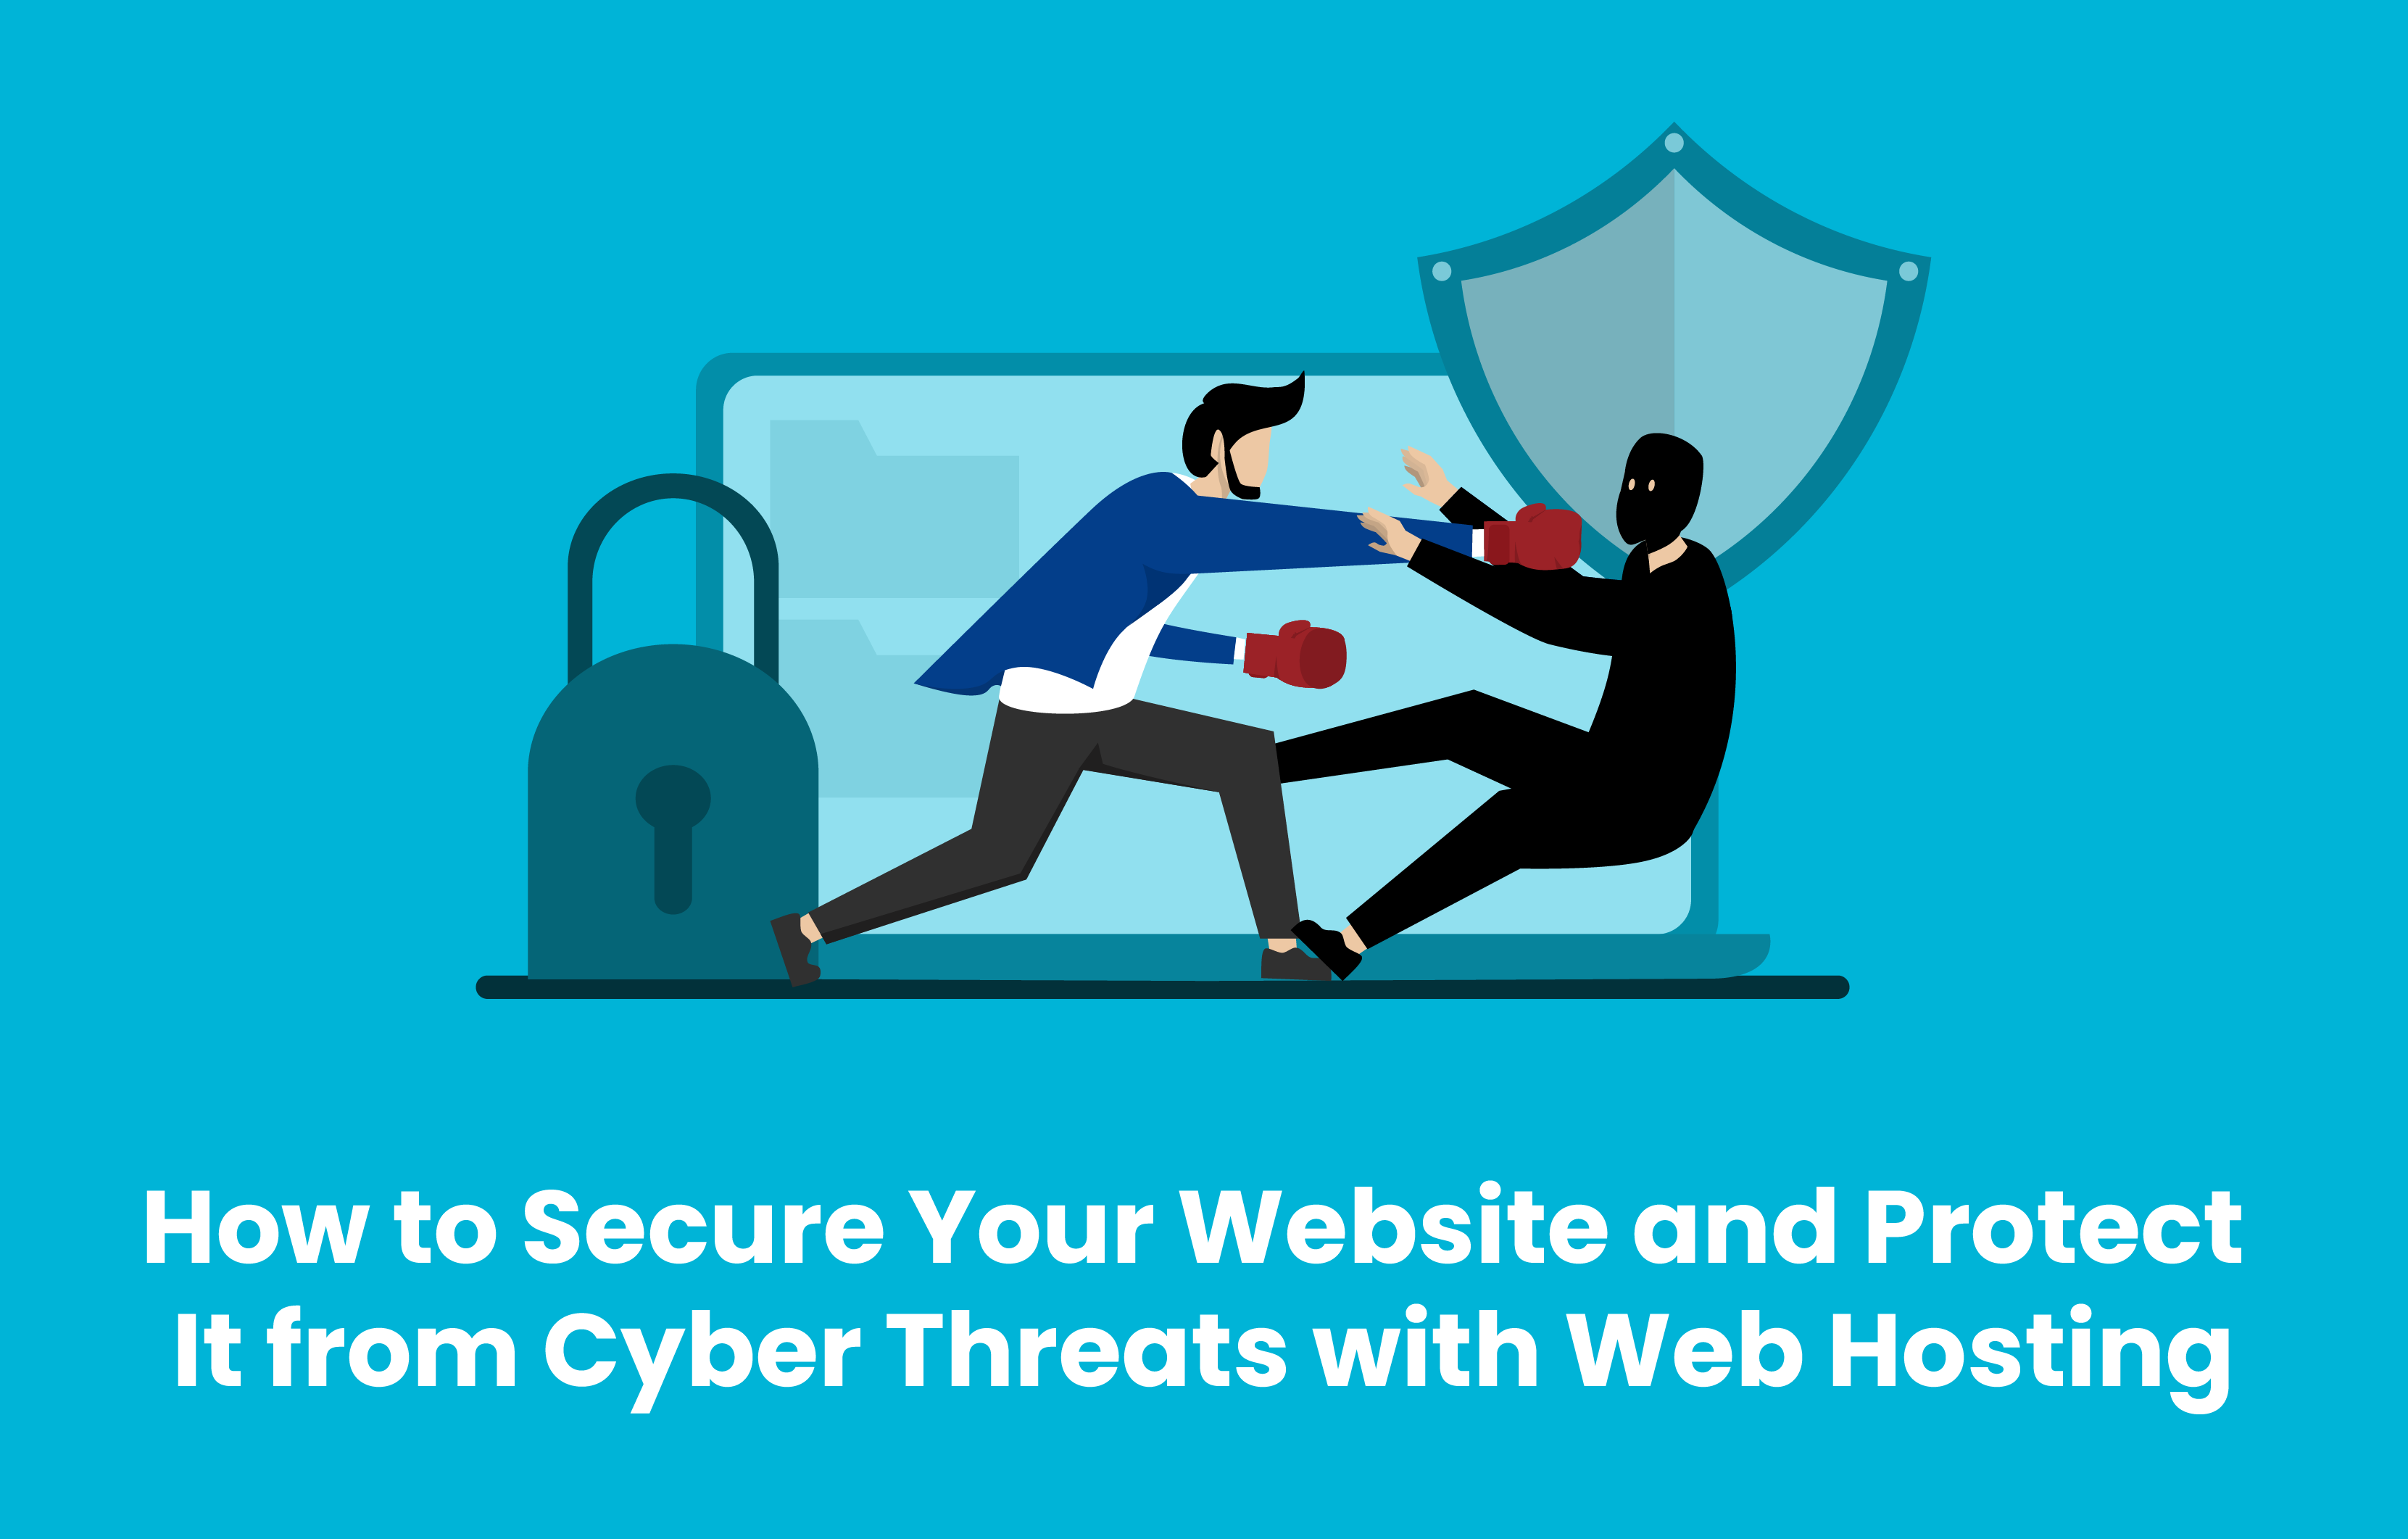 How to Secure Your Website and Protect It from Cyber Threats with Web Hosting